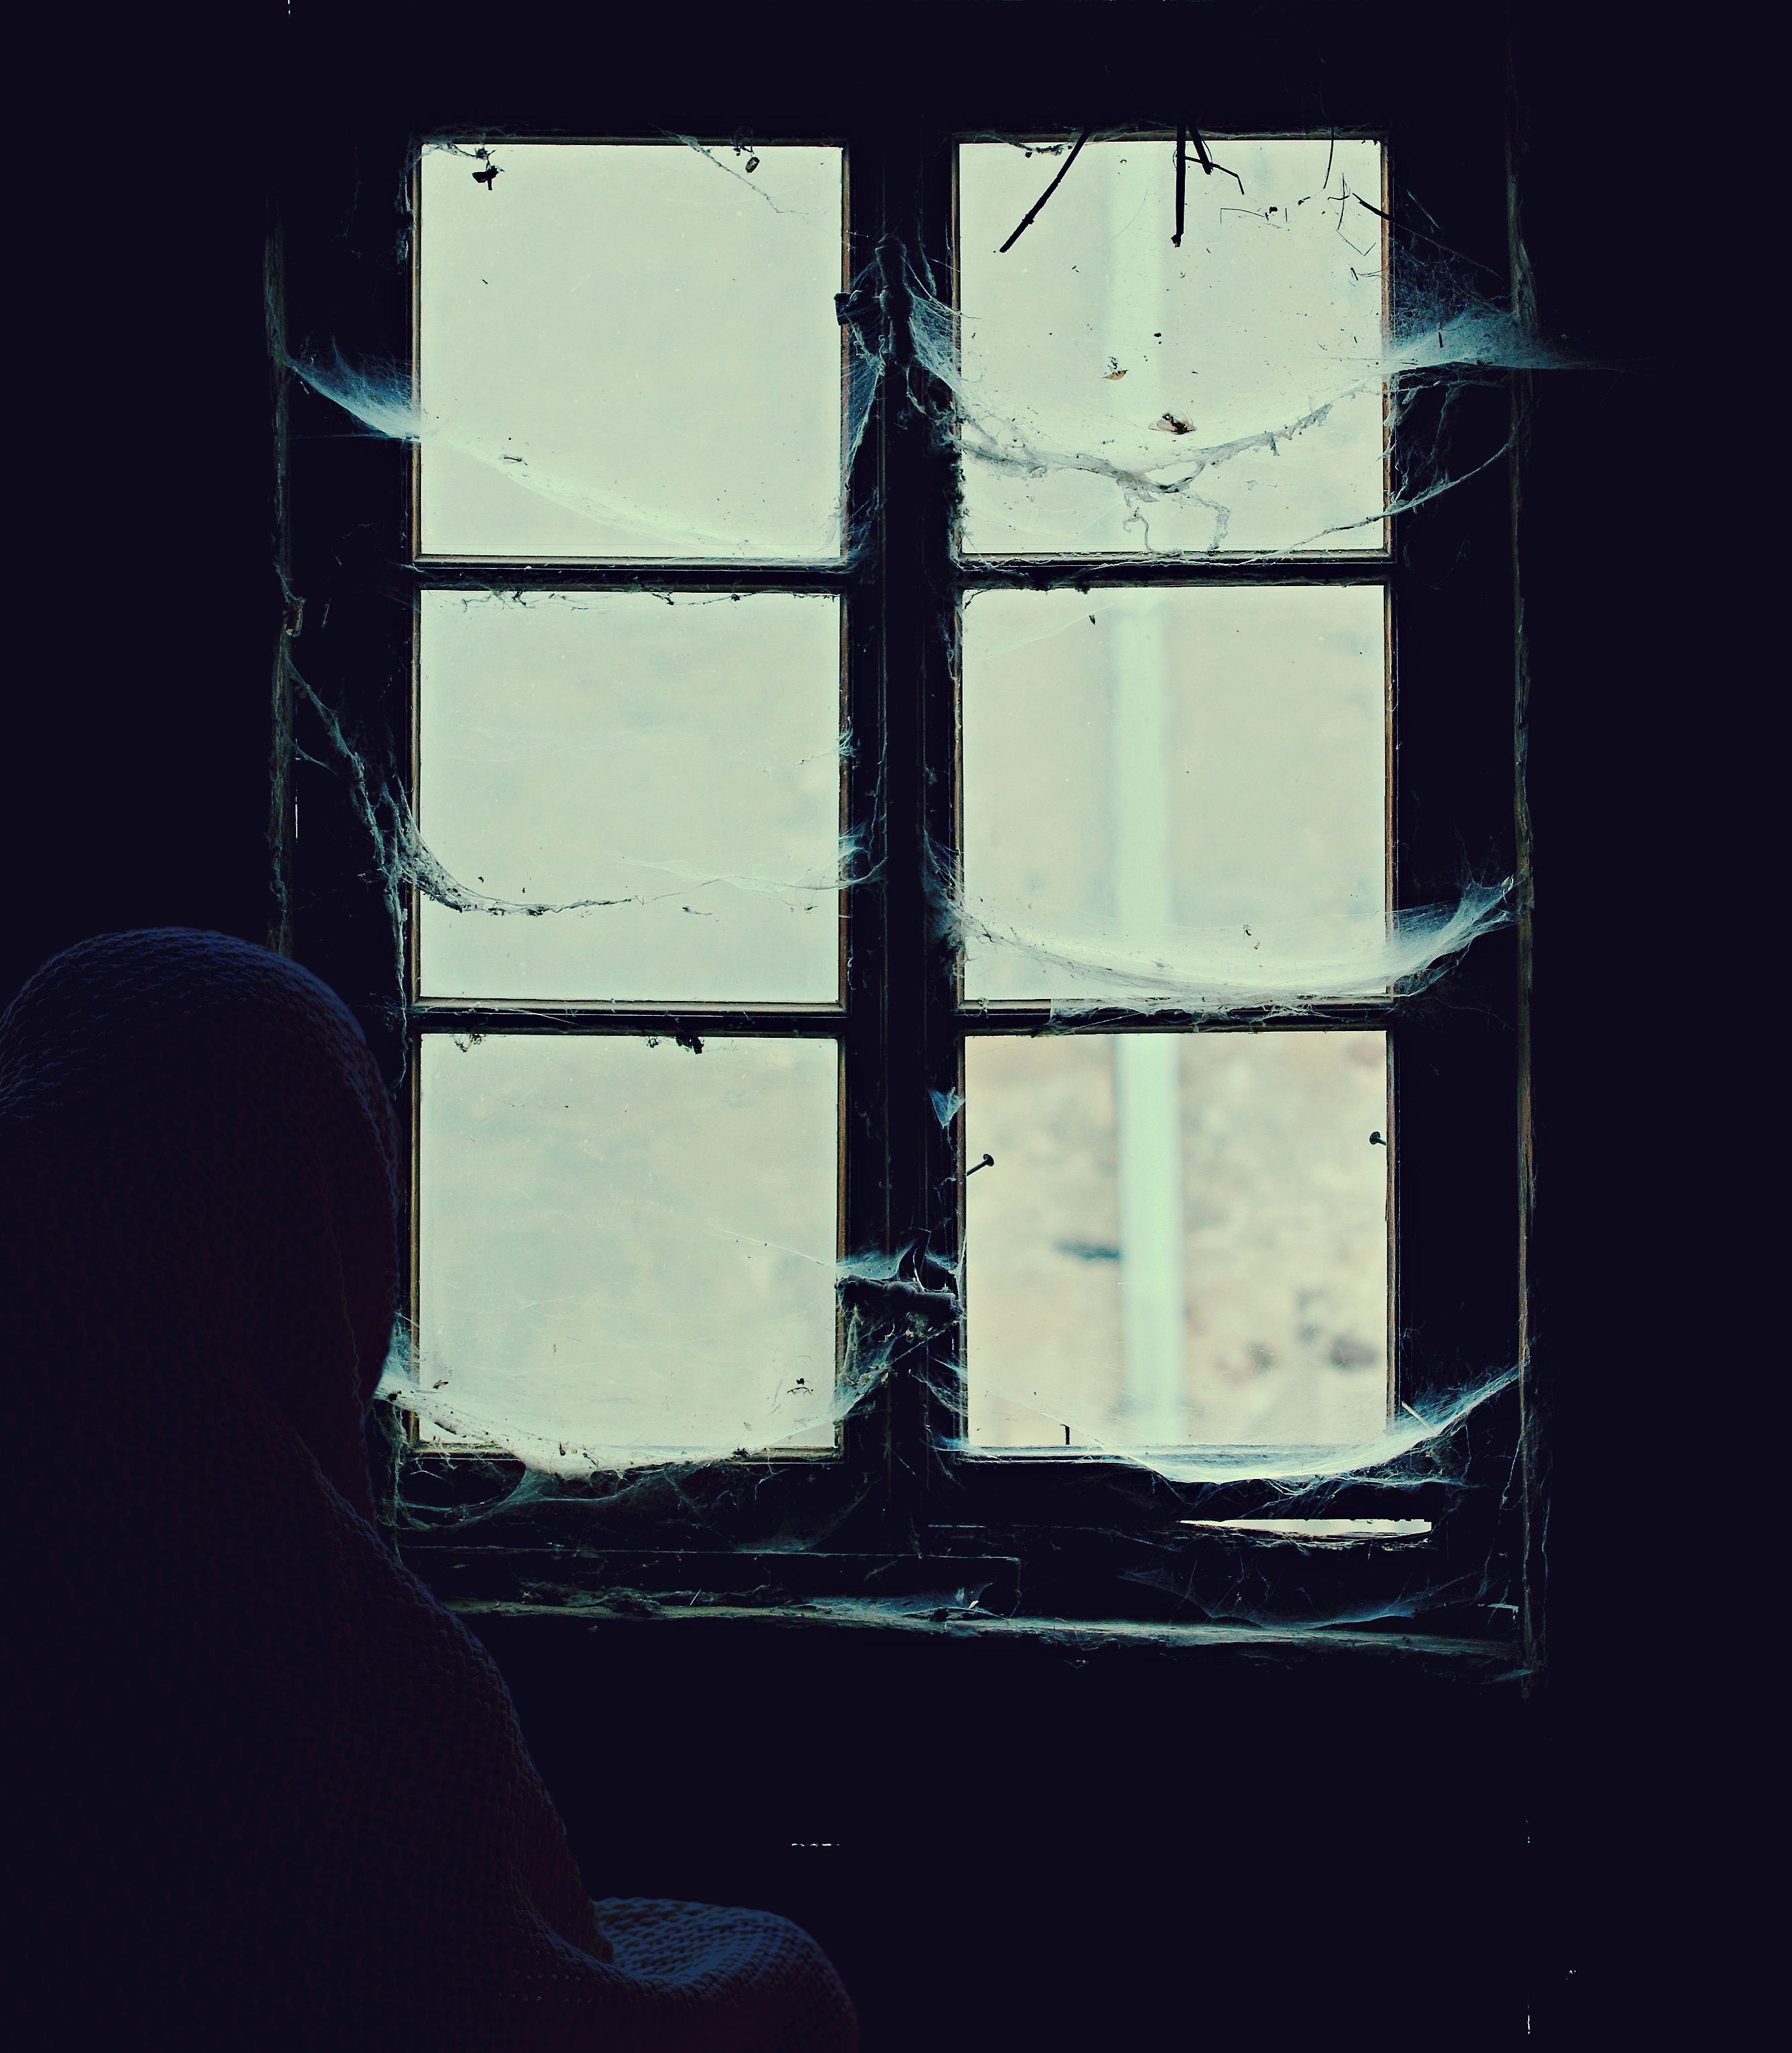 web, miscellanea, miscellaneous, window, loneliness, alone, lonely, abandoned, hopelessness, despair